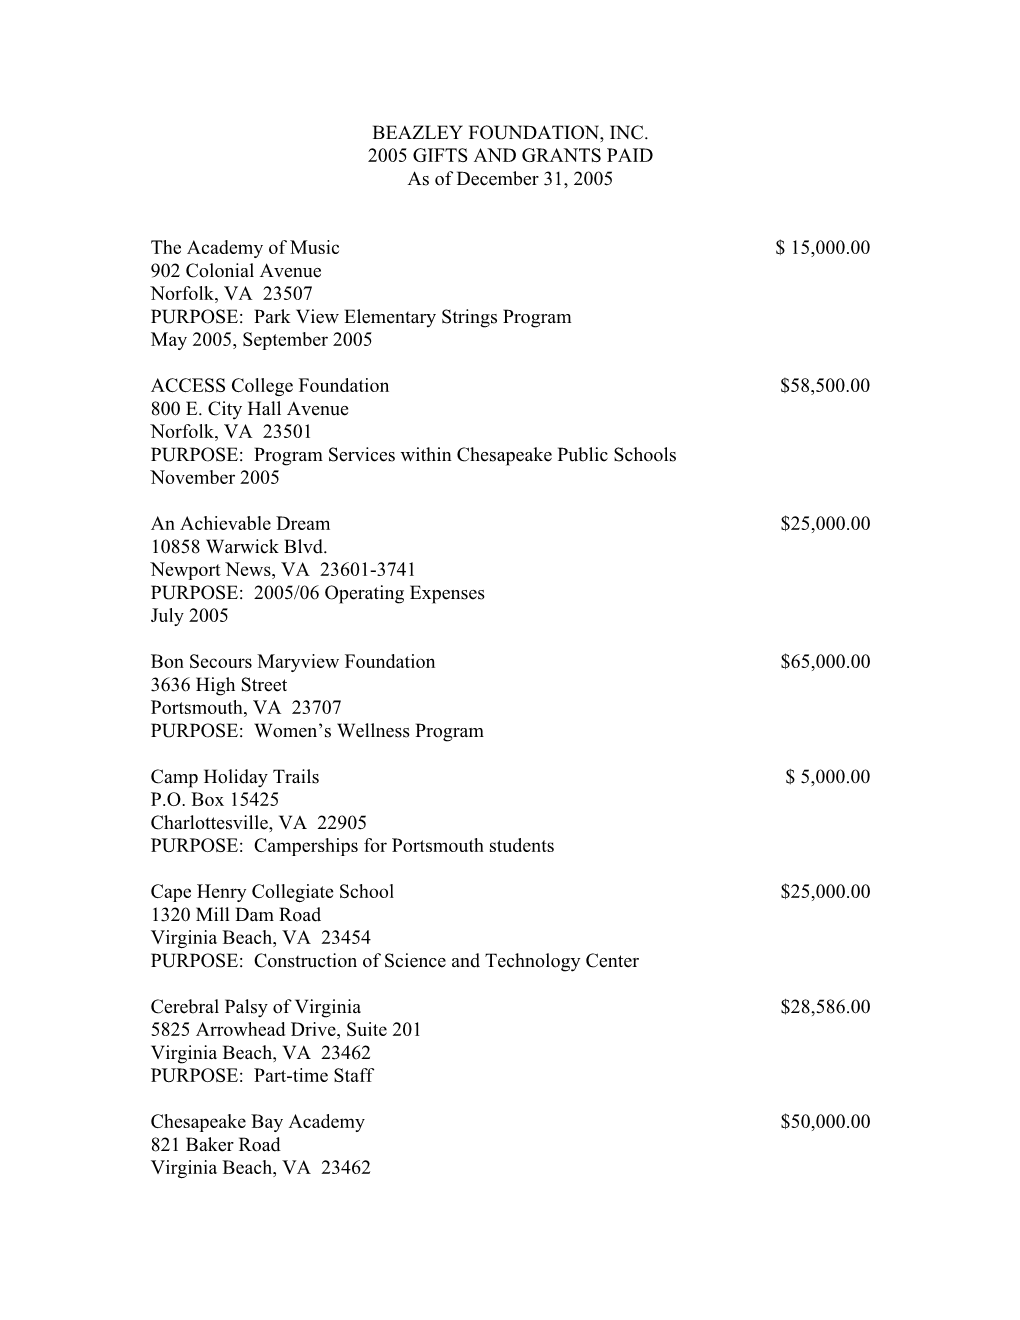 BEAZLEY FOUNDATION, INC. 2005 GIFTS and GRANTS PAID As of December 31, 2005